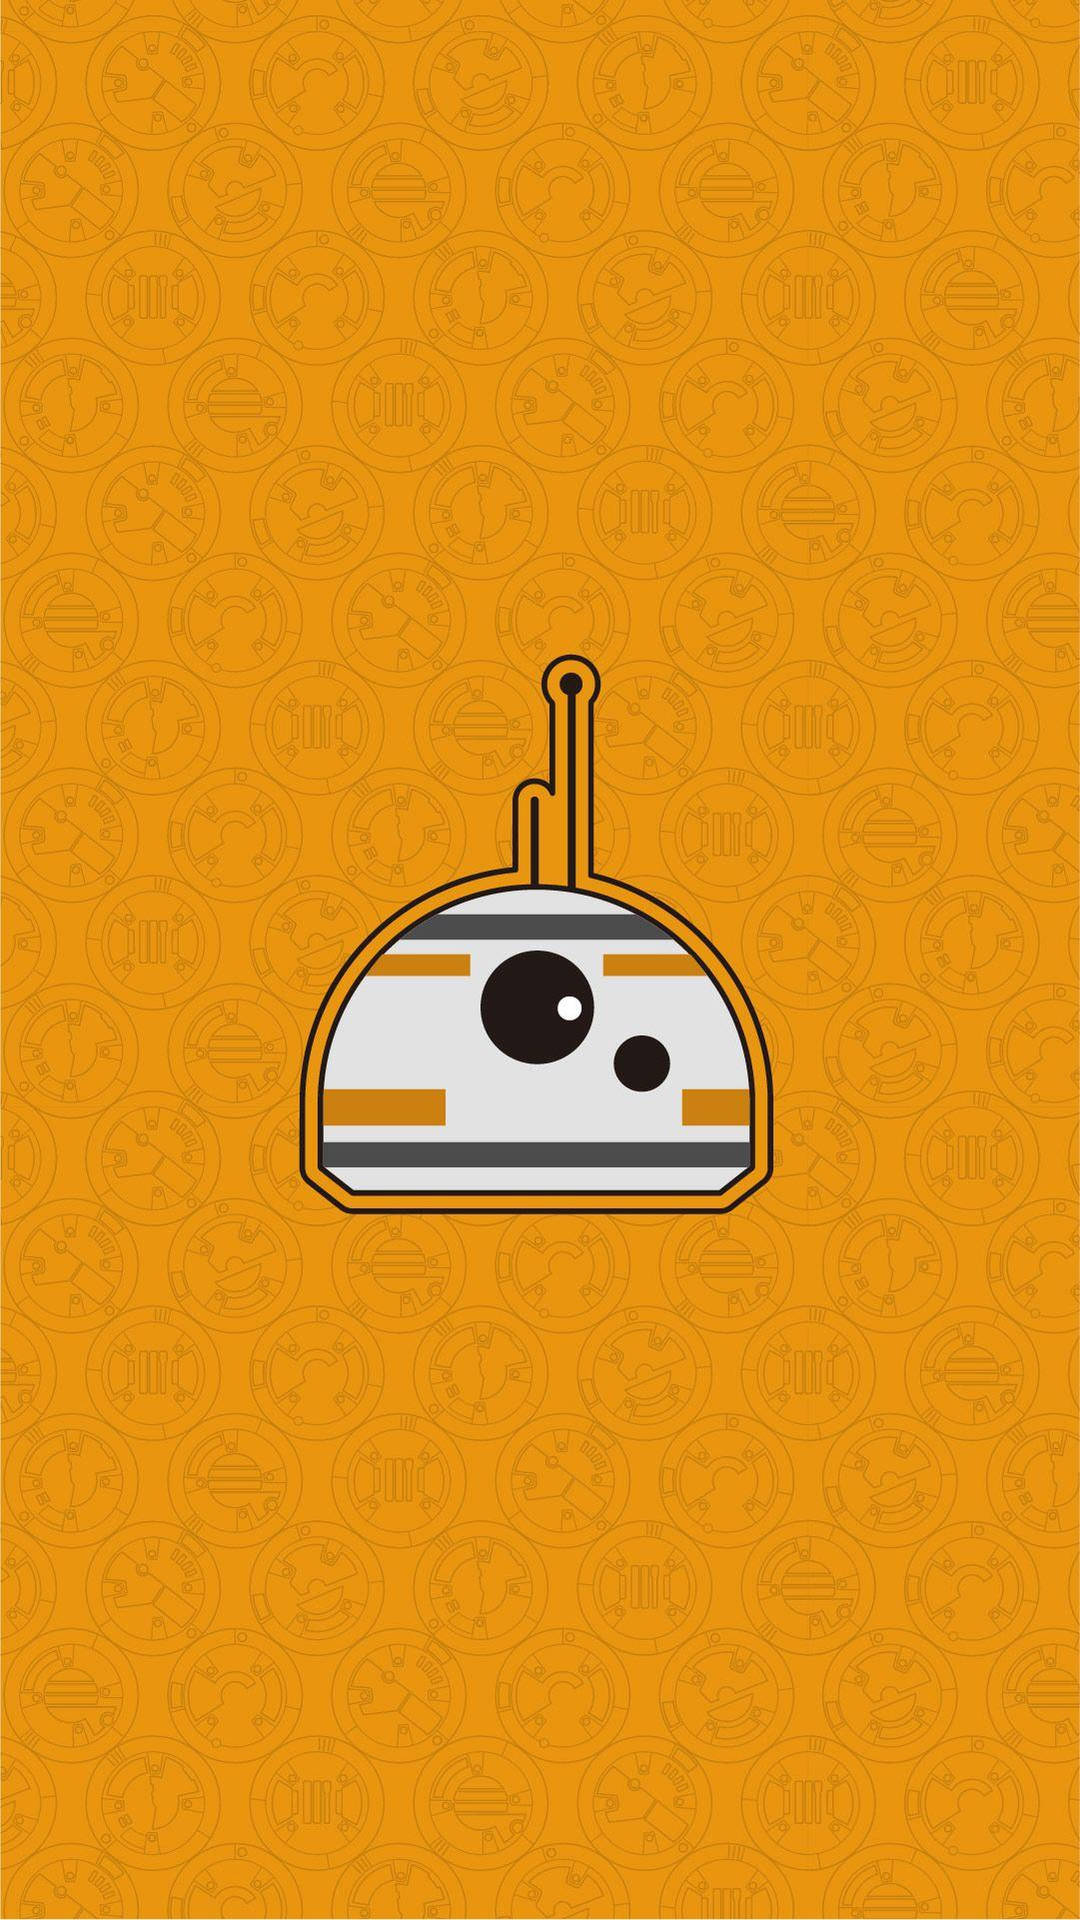 Exceptional Bb-8 Head Design On Hd Display Phone